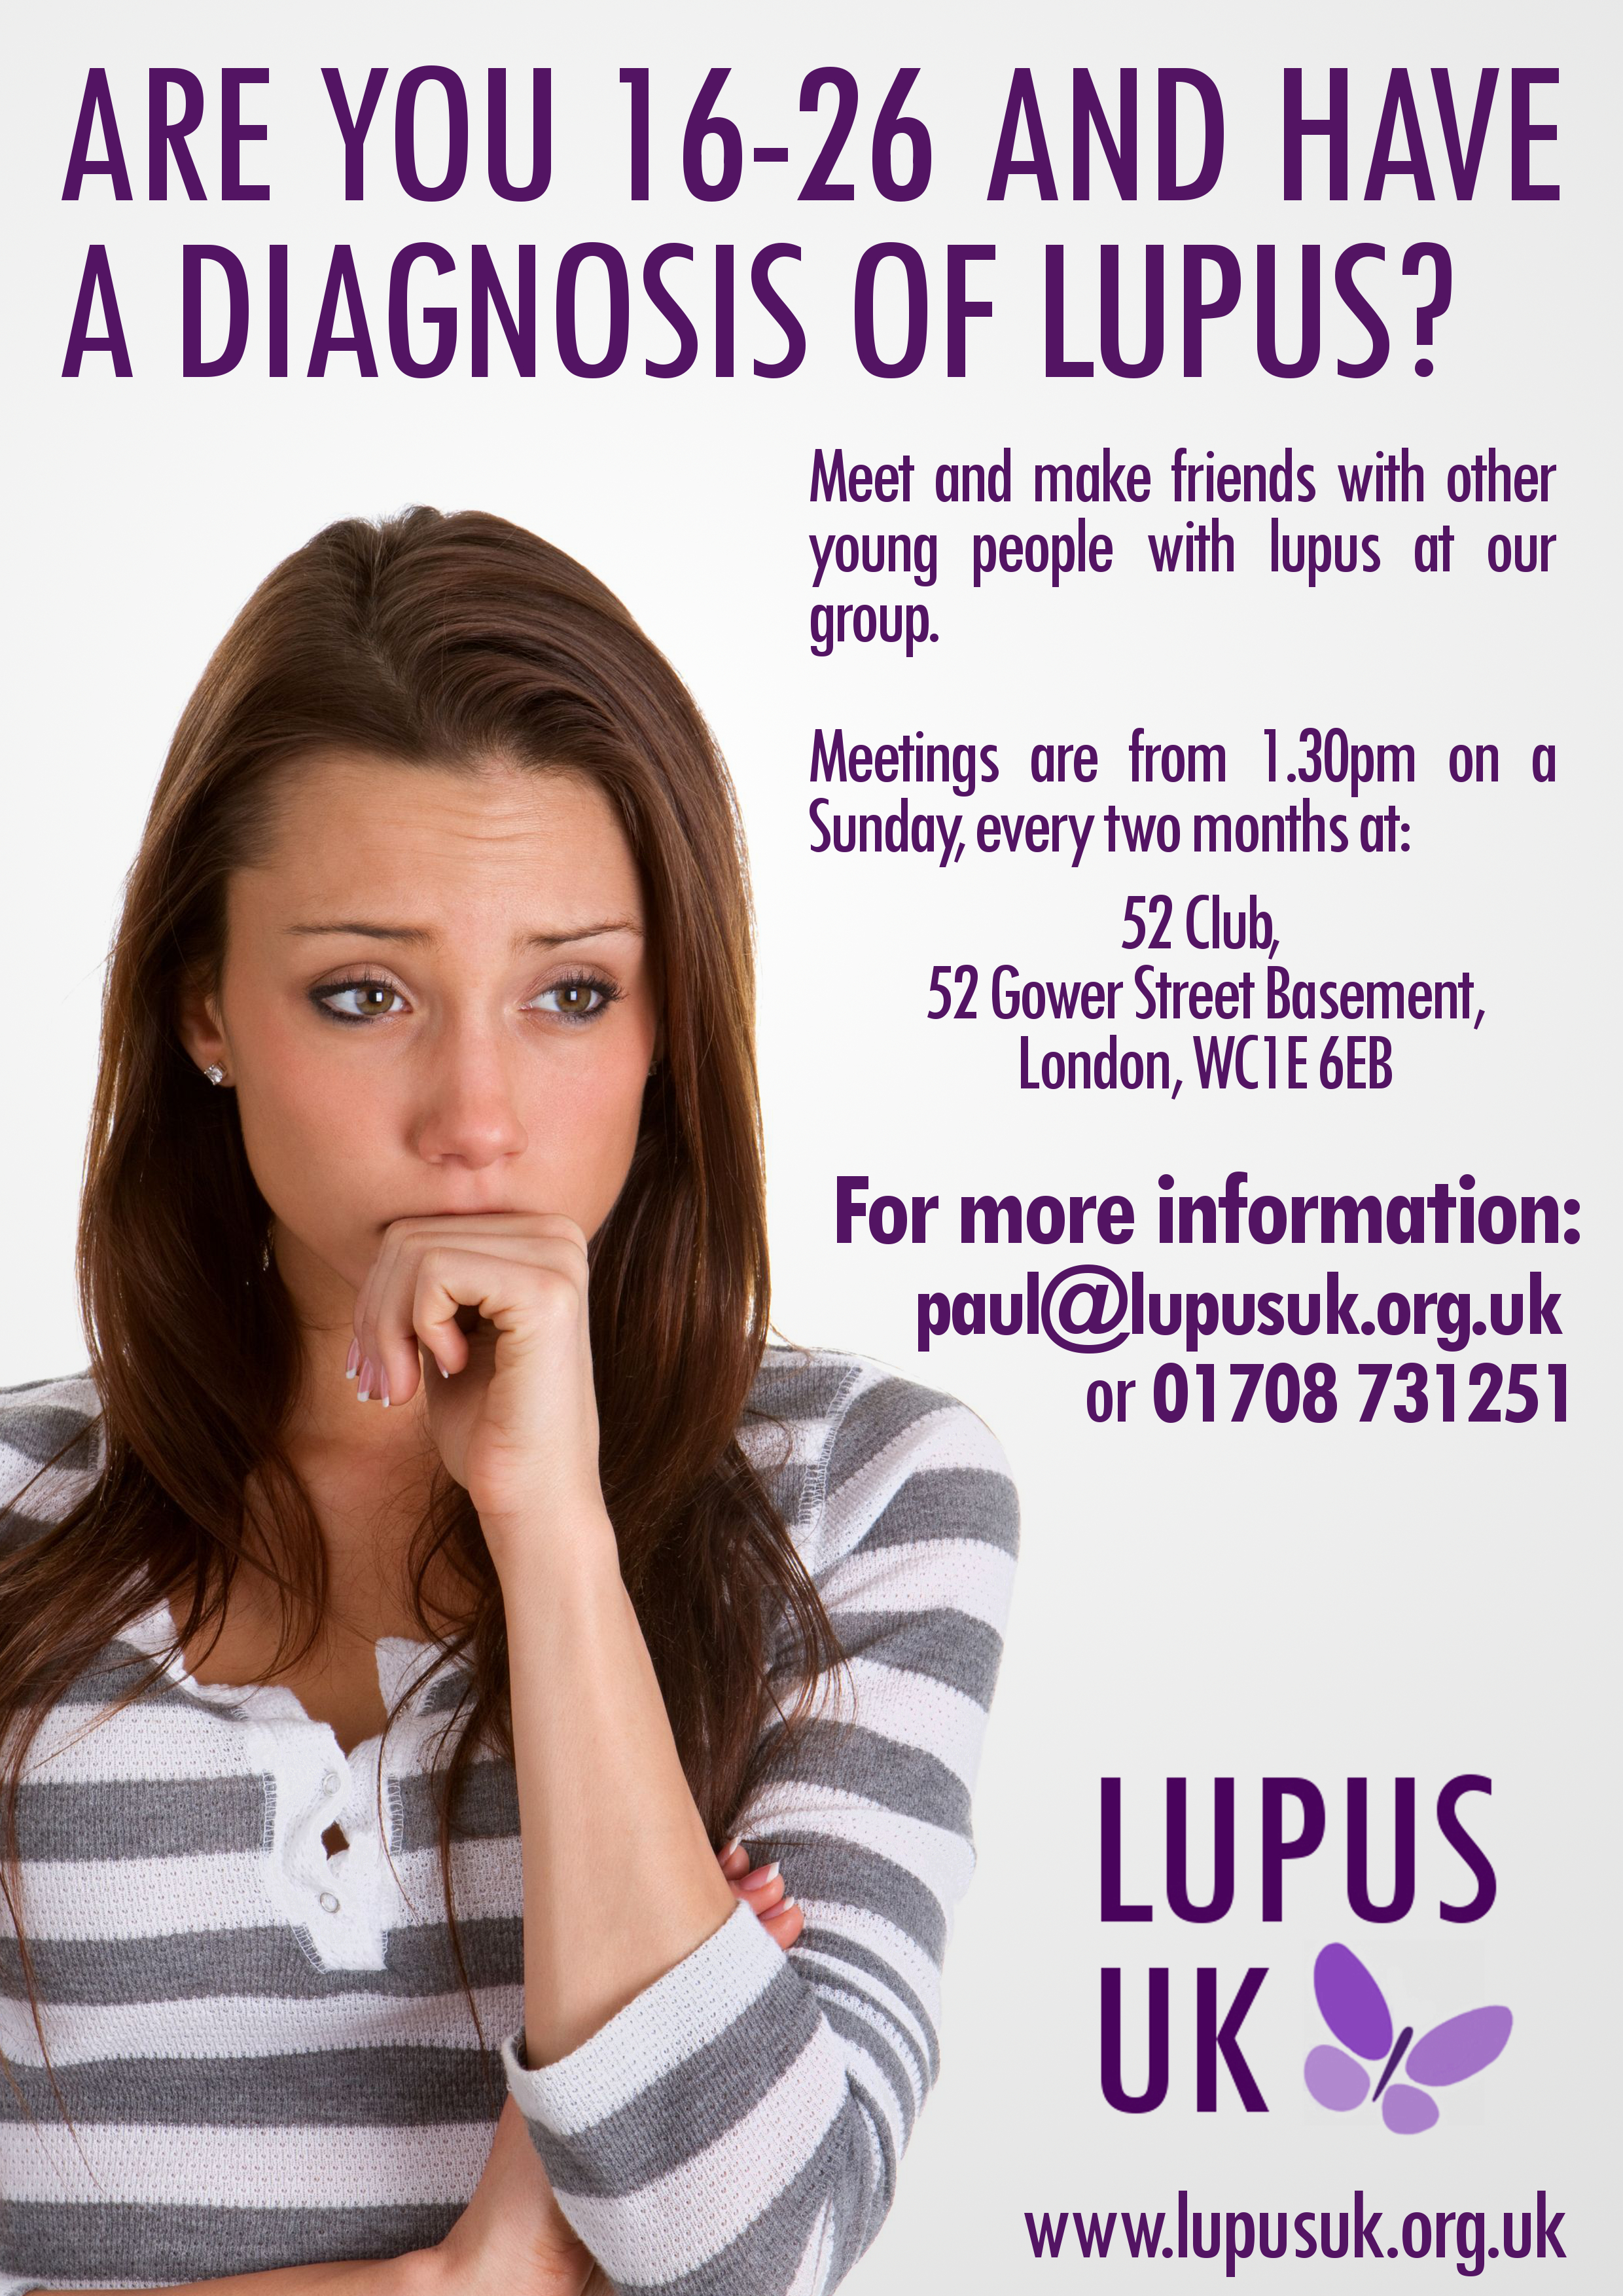 My Lupus (What I Need to Know) - A Young Person's Guide.